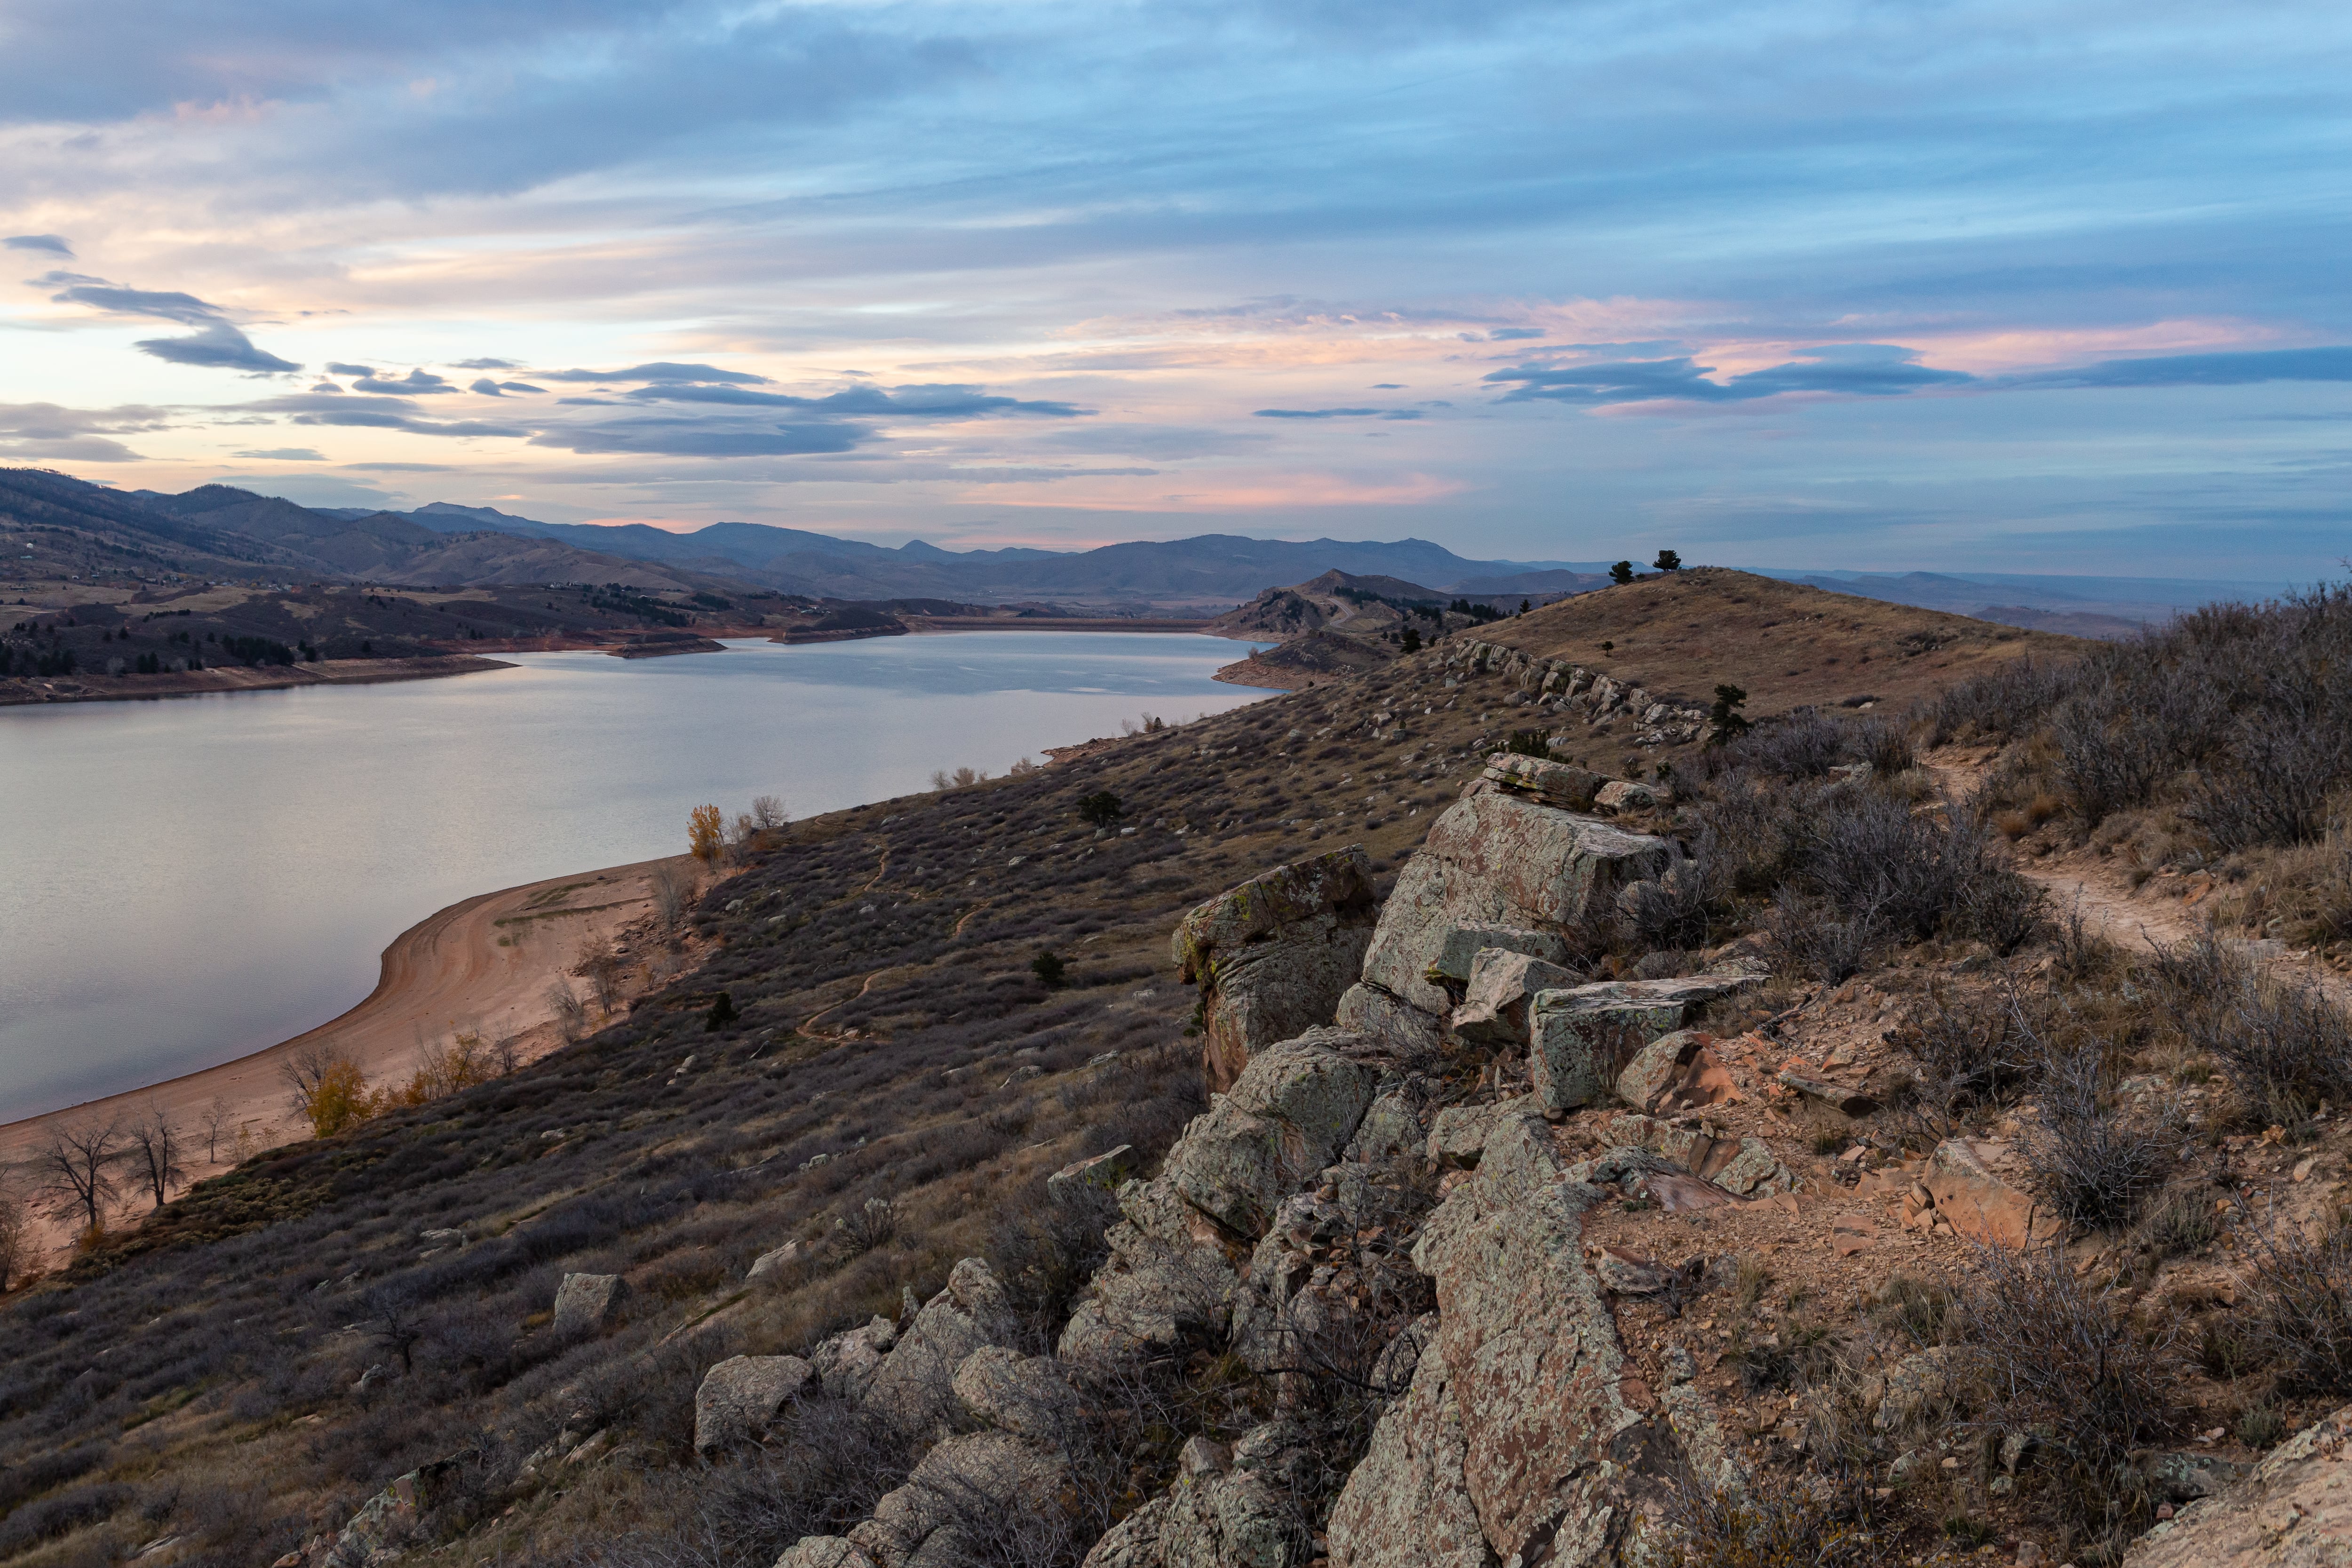 A late-day scenic photo of Horsetooth Reservoir in Fort Collins, Colorado.